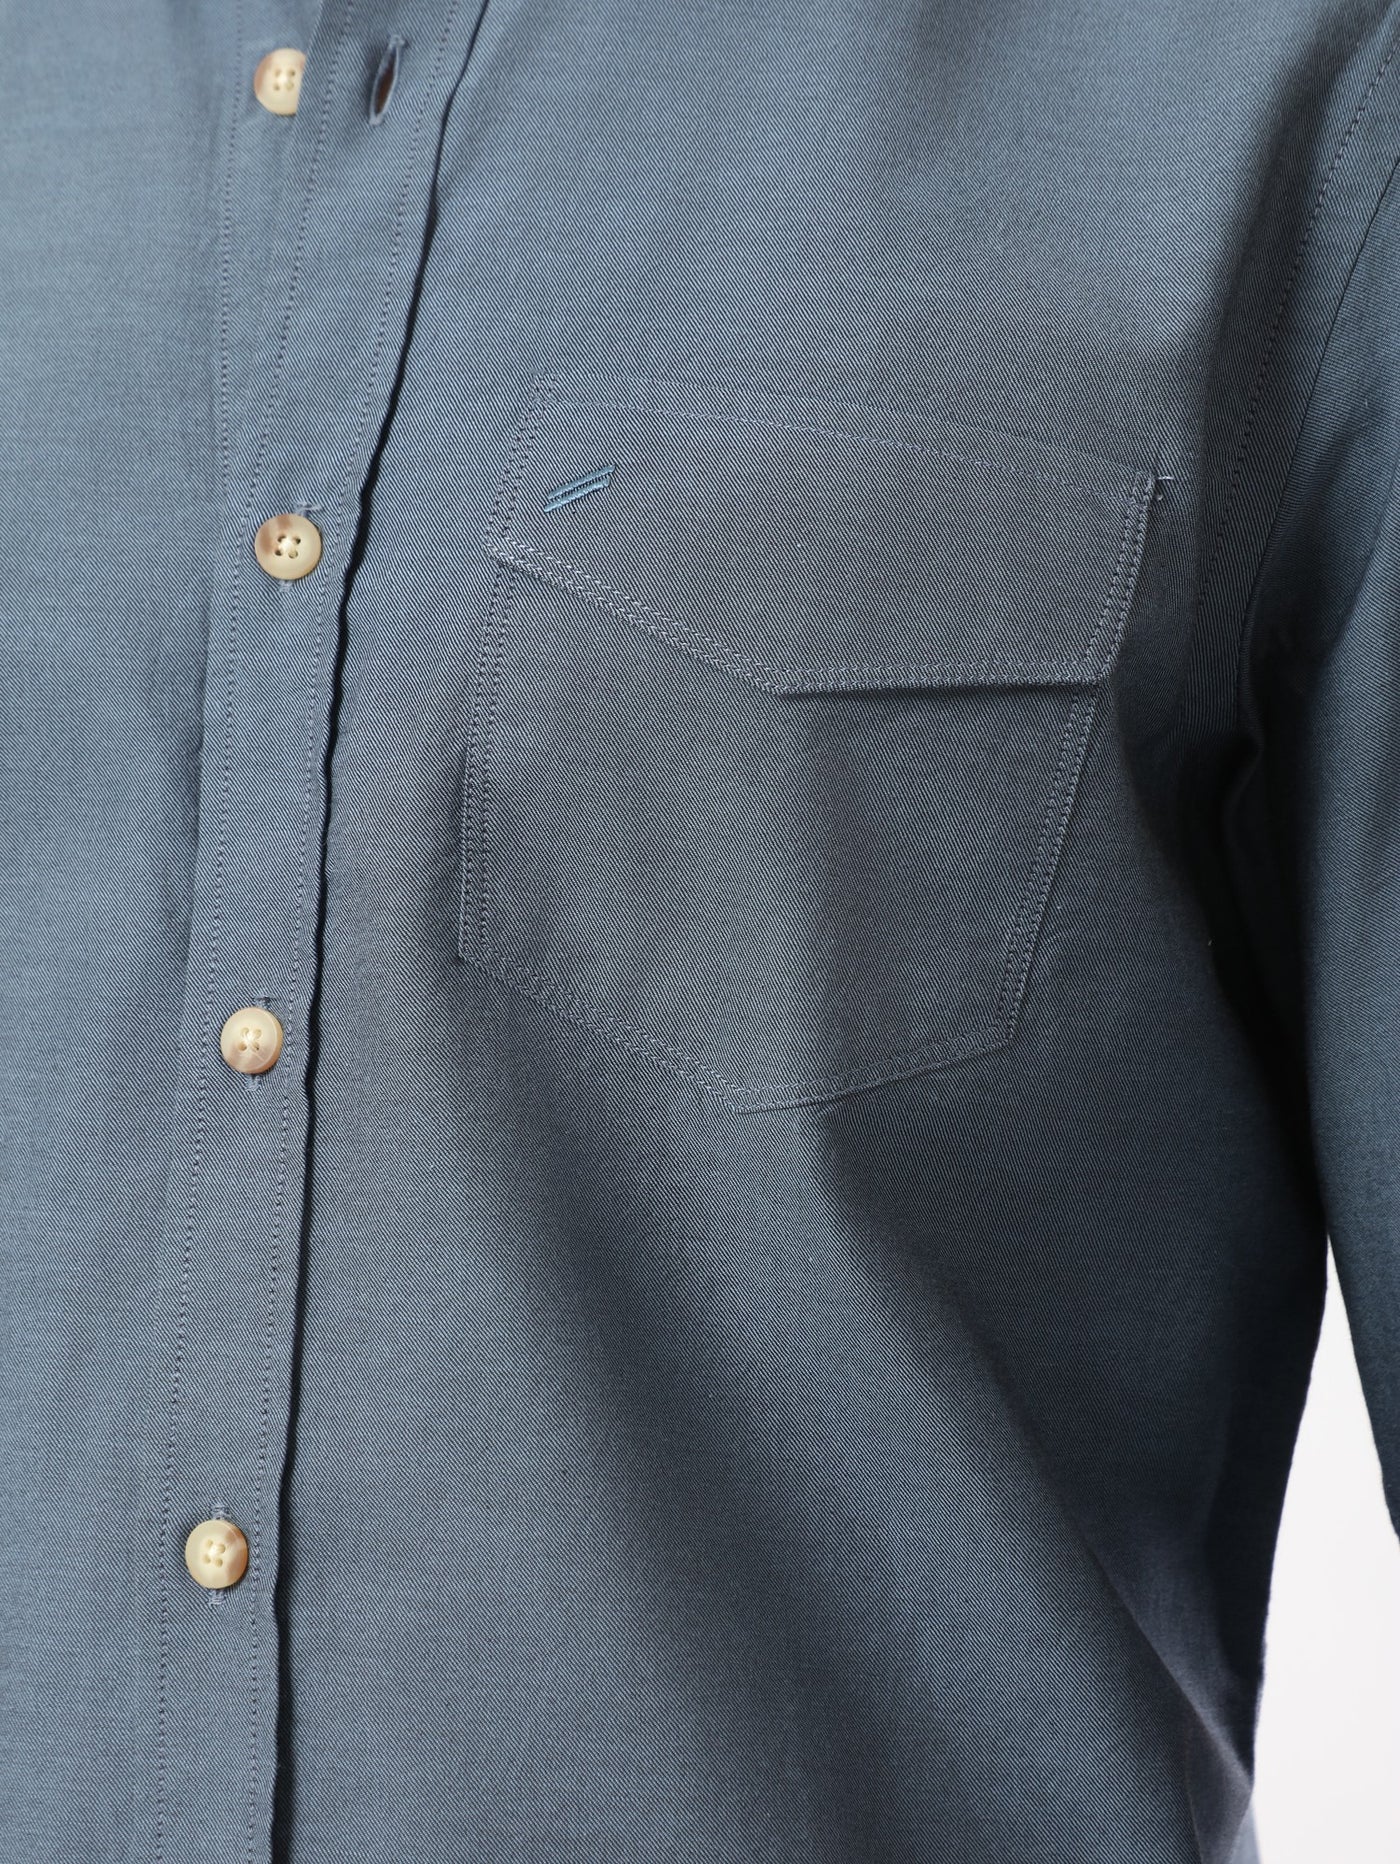 Shirt - With Pocket - Button Closure